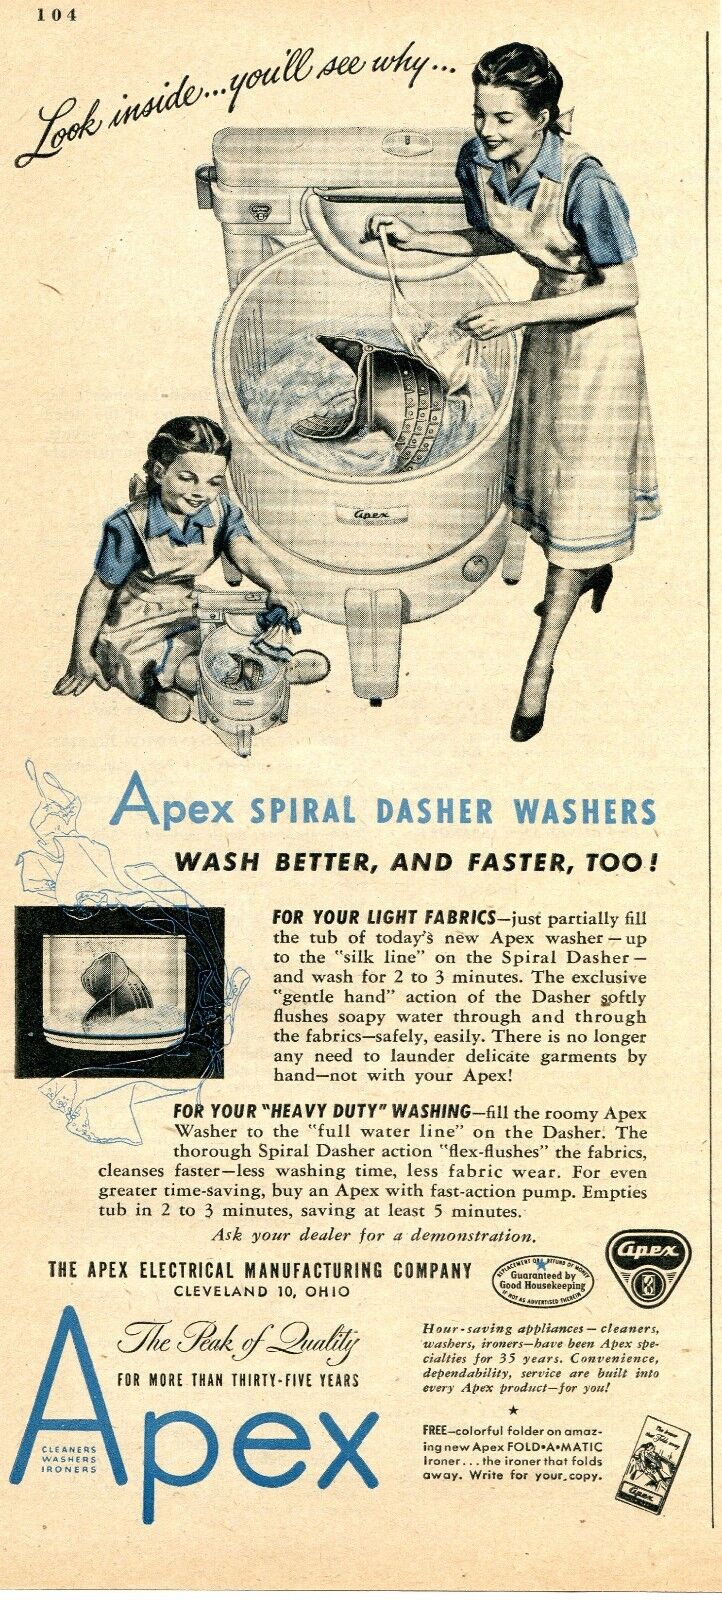 1948 Print Ad of Apex Spiral Dasher Washer Machine look inside... you'll see why